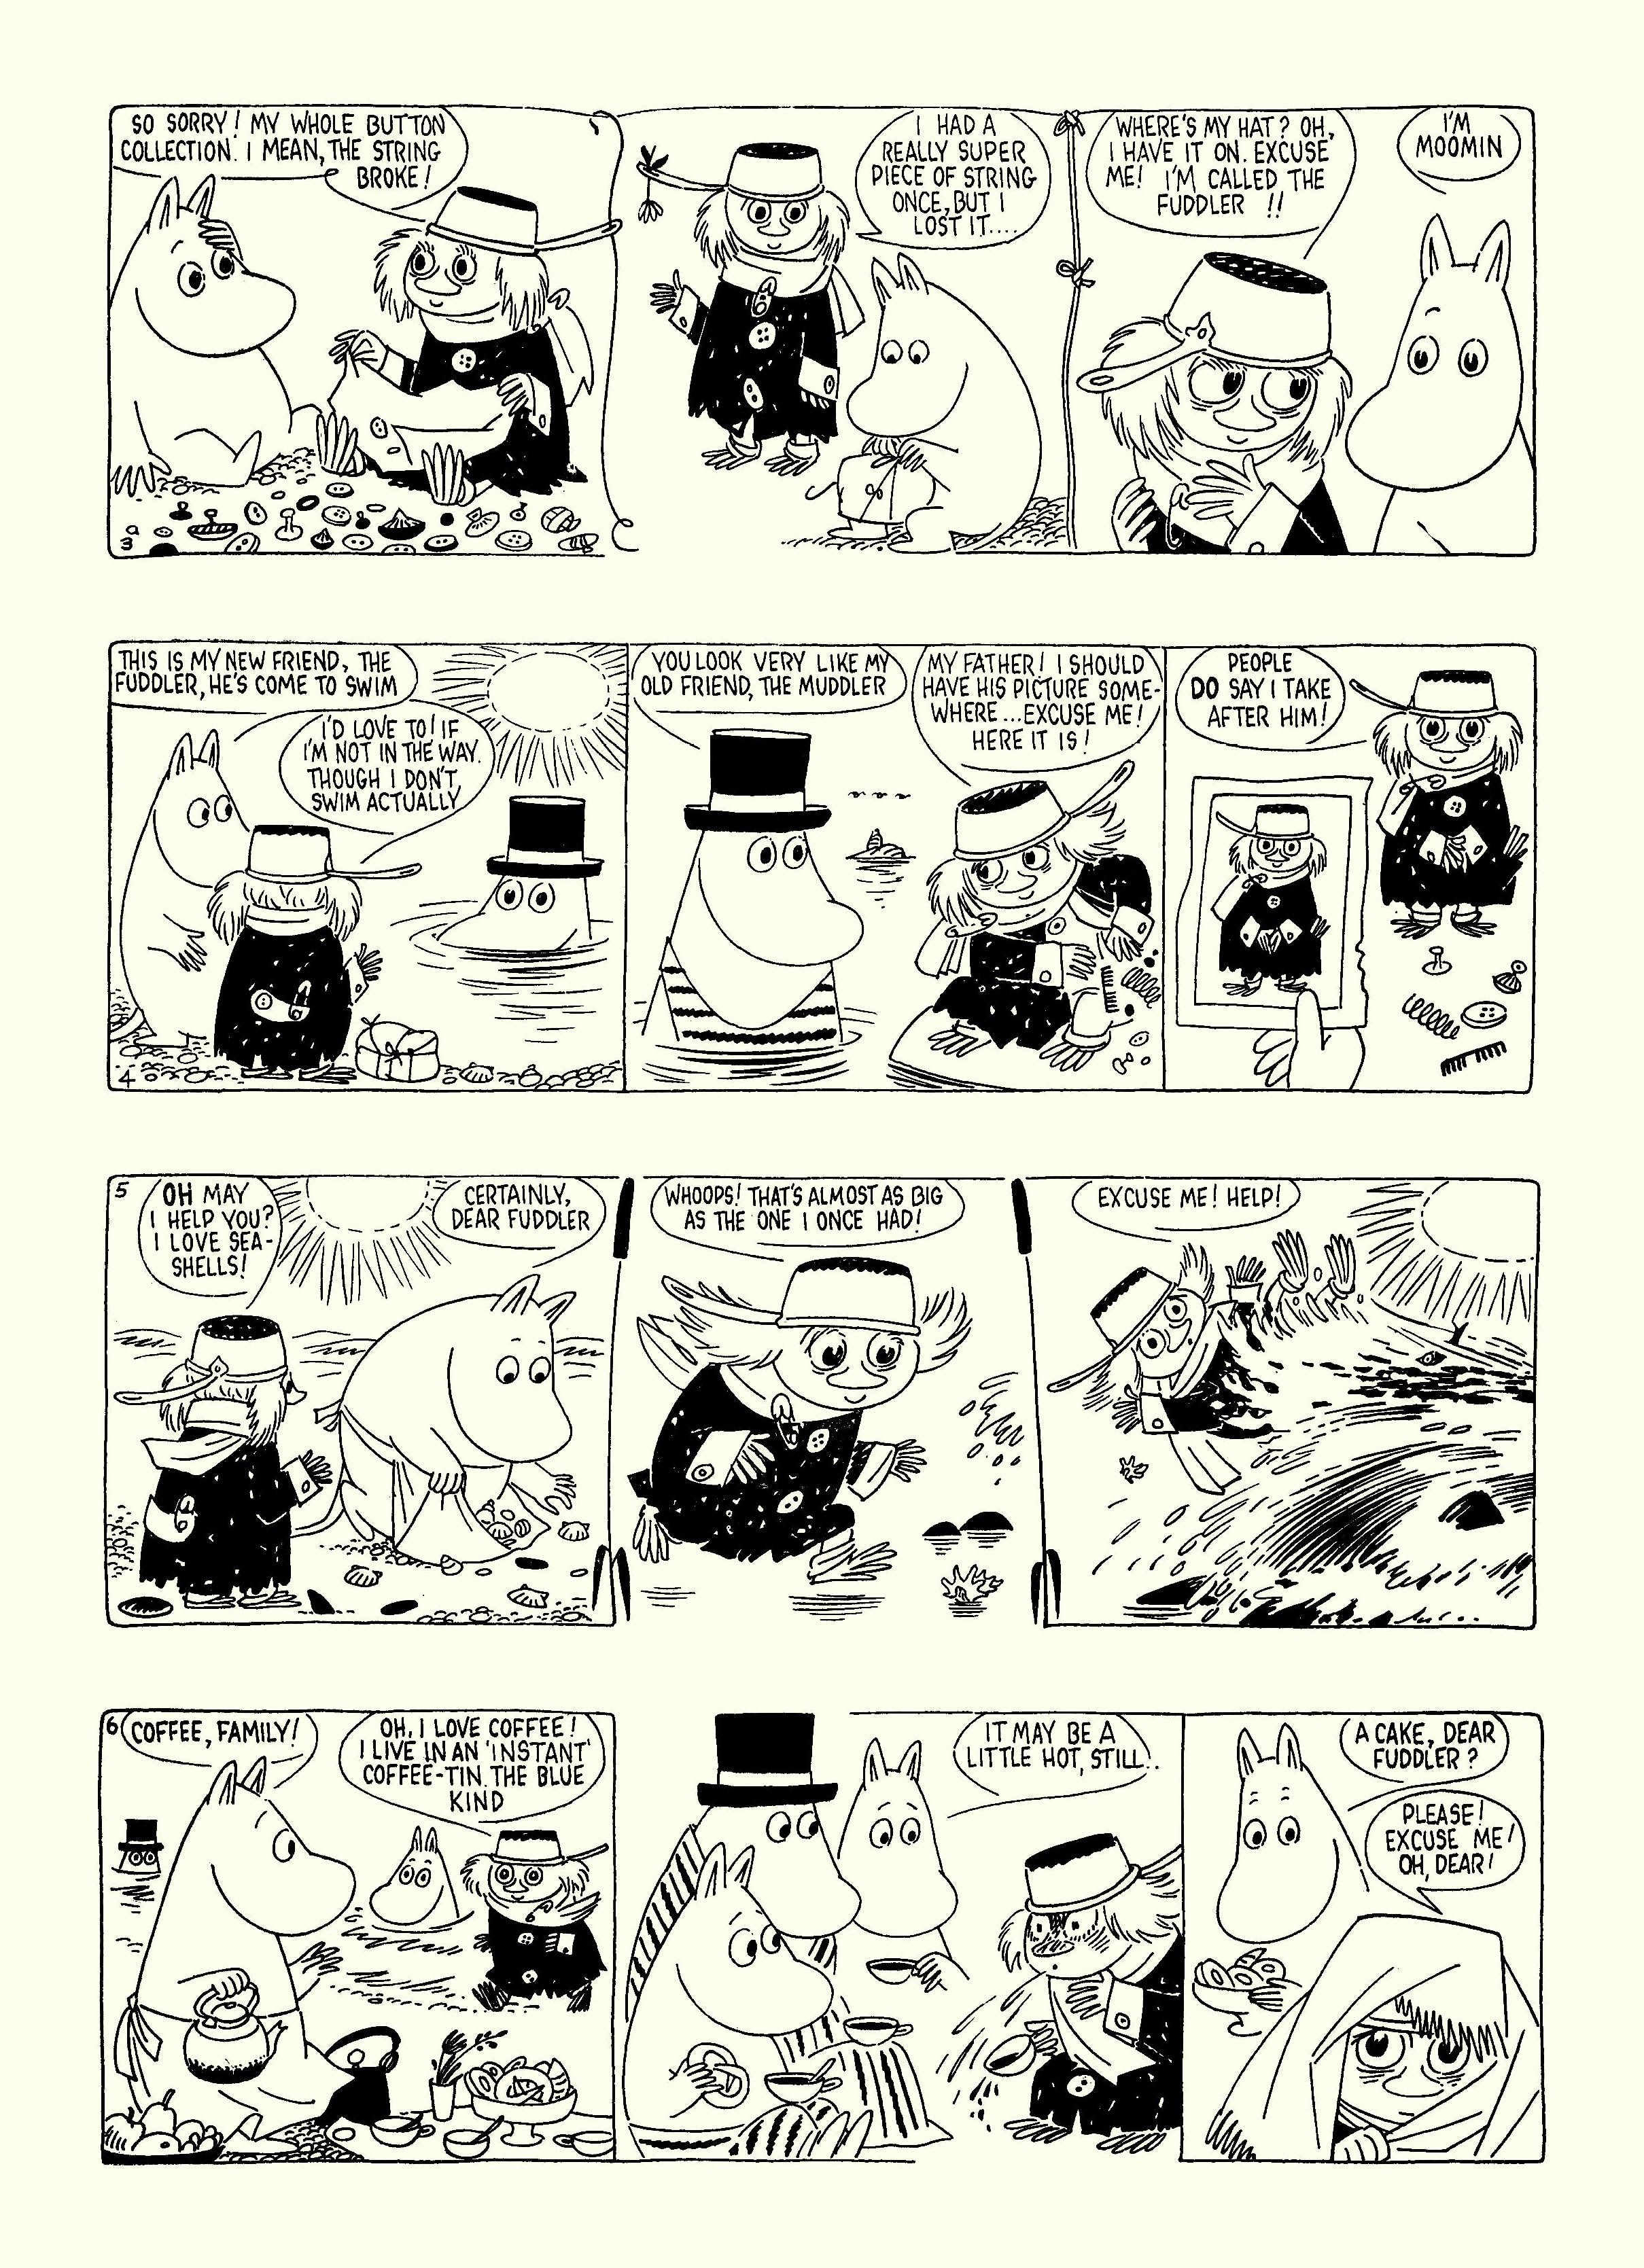 Read online Moomin: The Complete Tove Jansson Comic Strip comic -  Issue # TPB 5 - 58